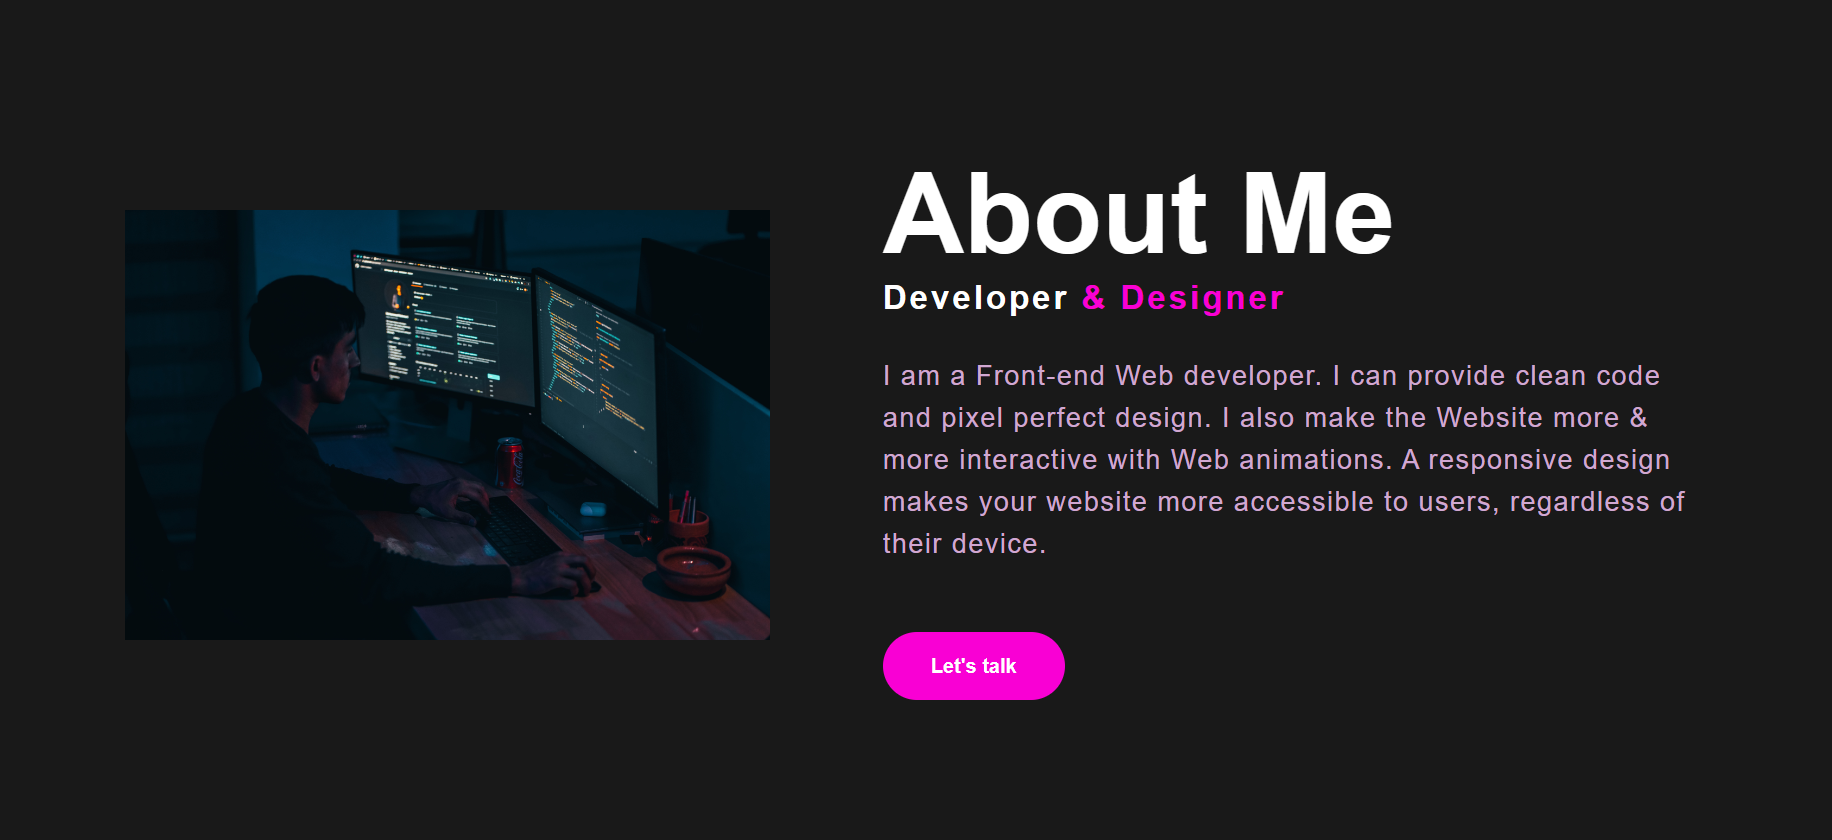 About Me

Developer

| am a Front-end Web developer. | can provide clean code
and pixel perfect design. | also make the Website more &
more interactive with Web animations. A responsive design
makes your website more accessible to users, regardless of
their device.

Let's talk